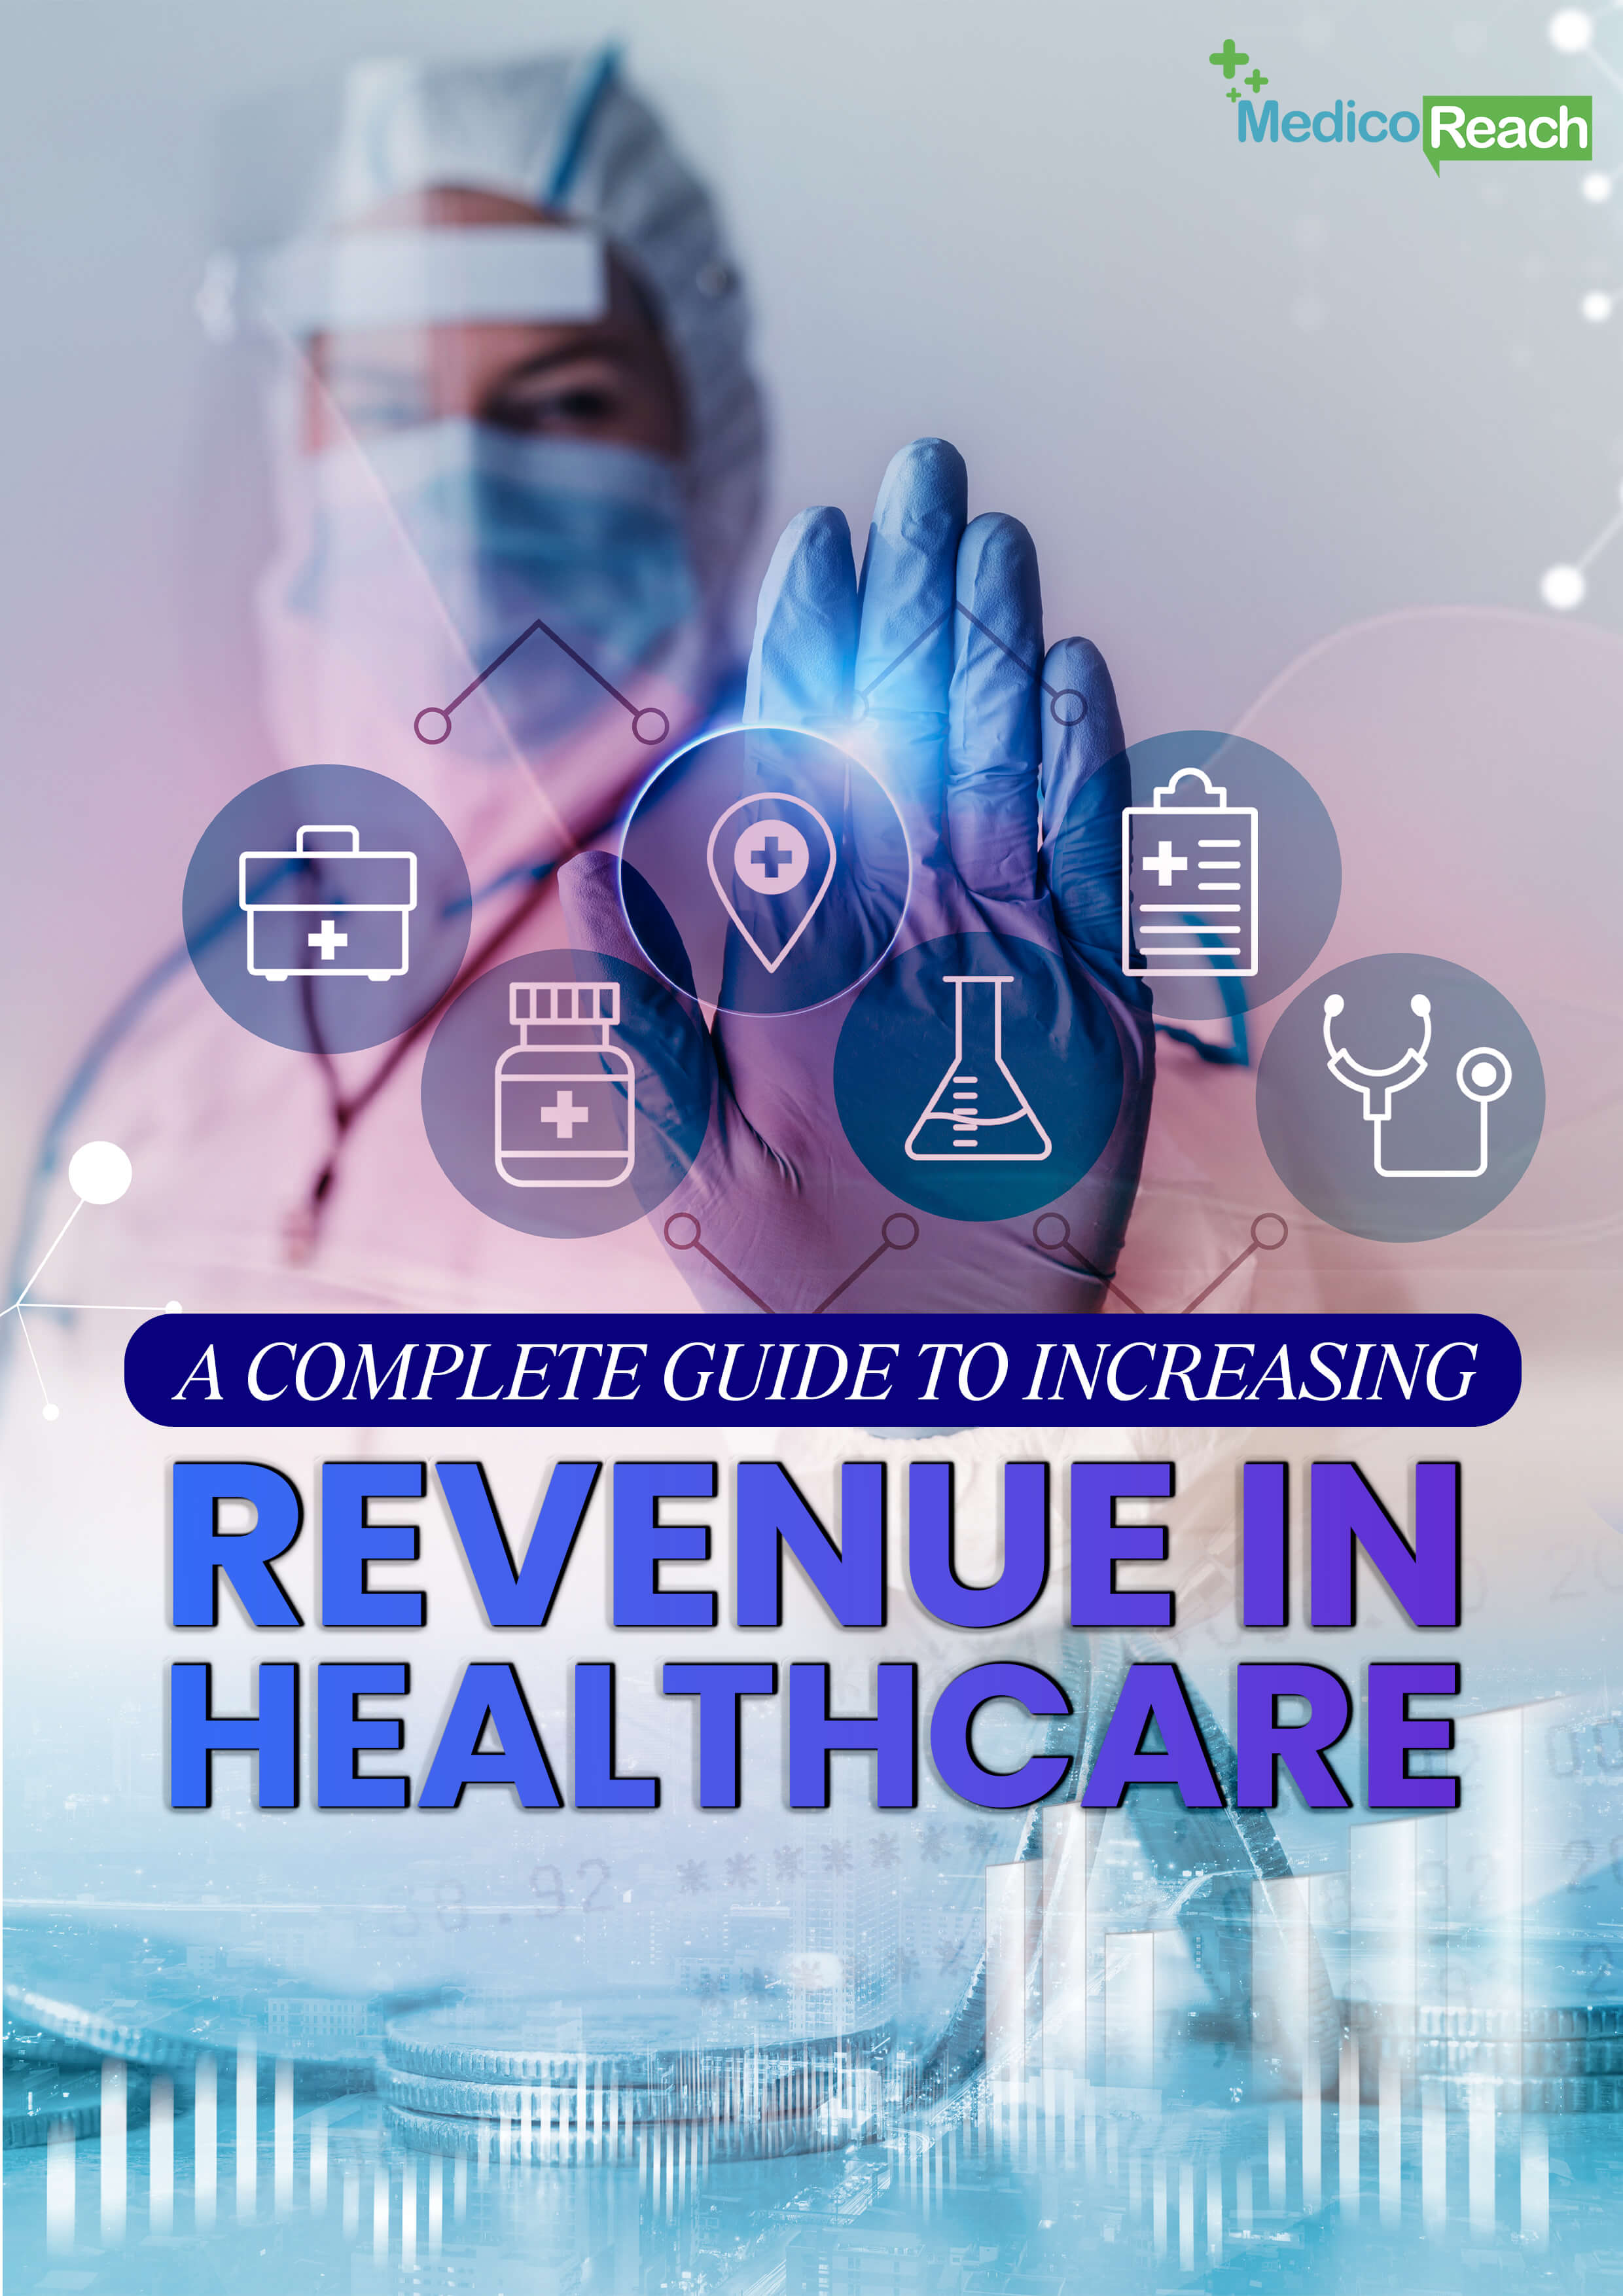 A-Complete-Guide-to-Increasing-Revenue-in-Healthcare-Banner